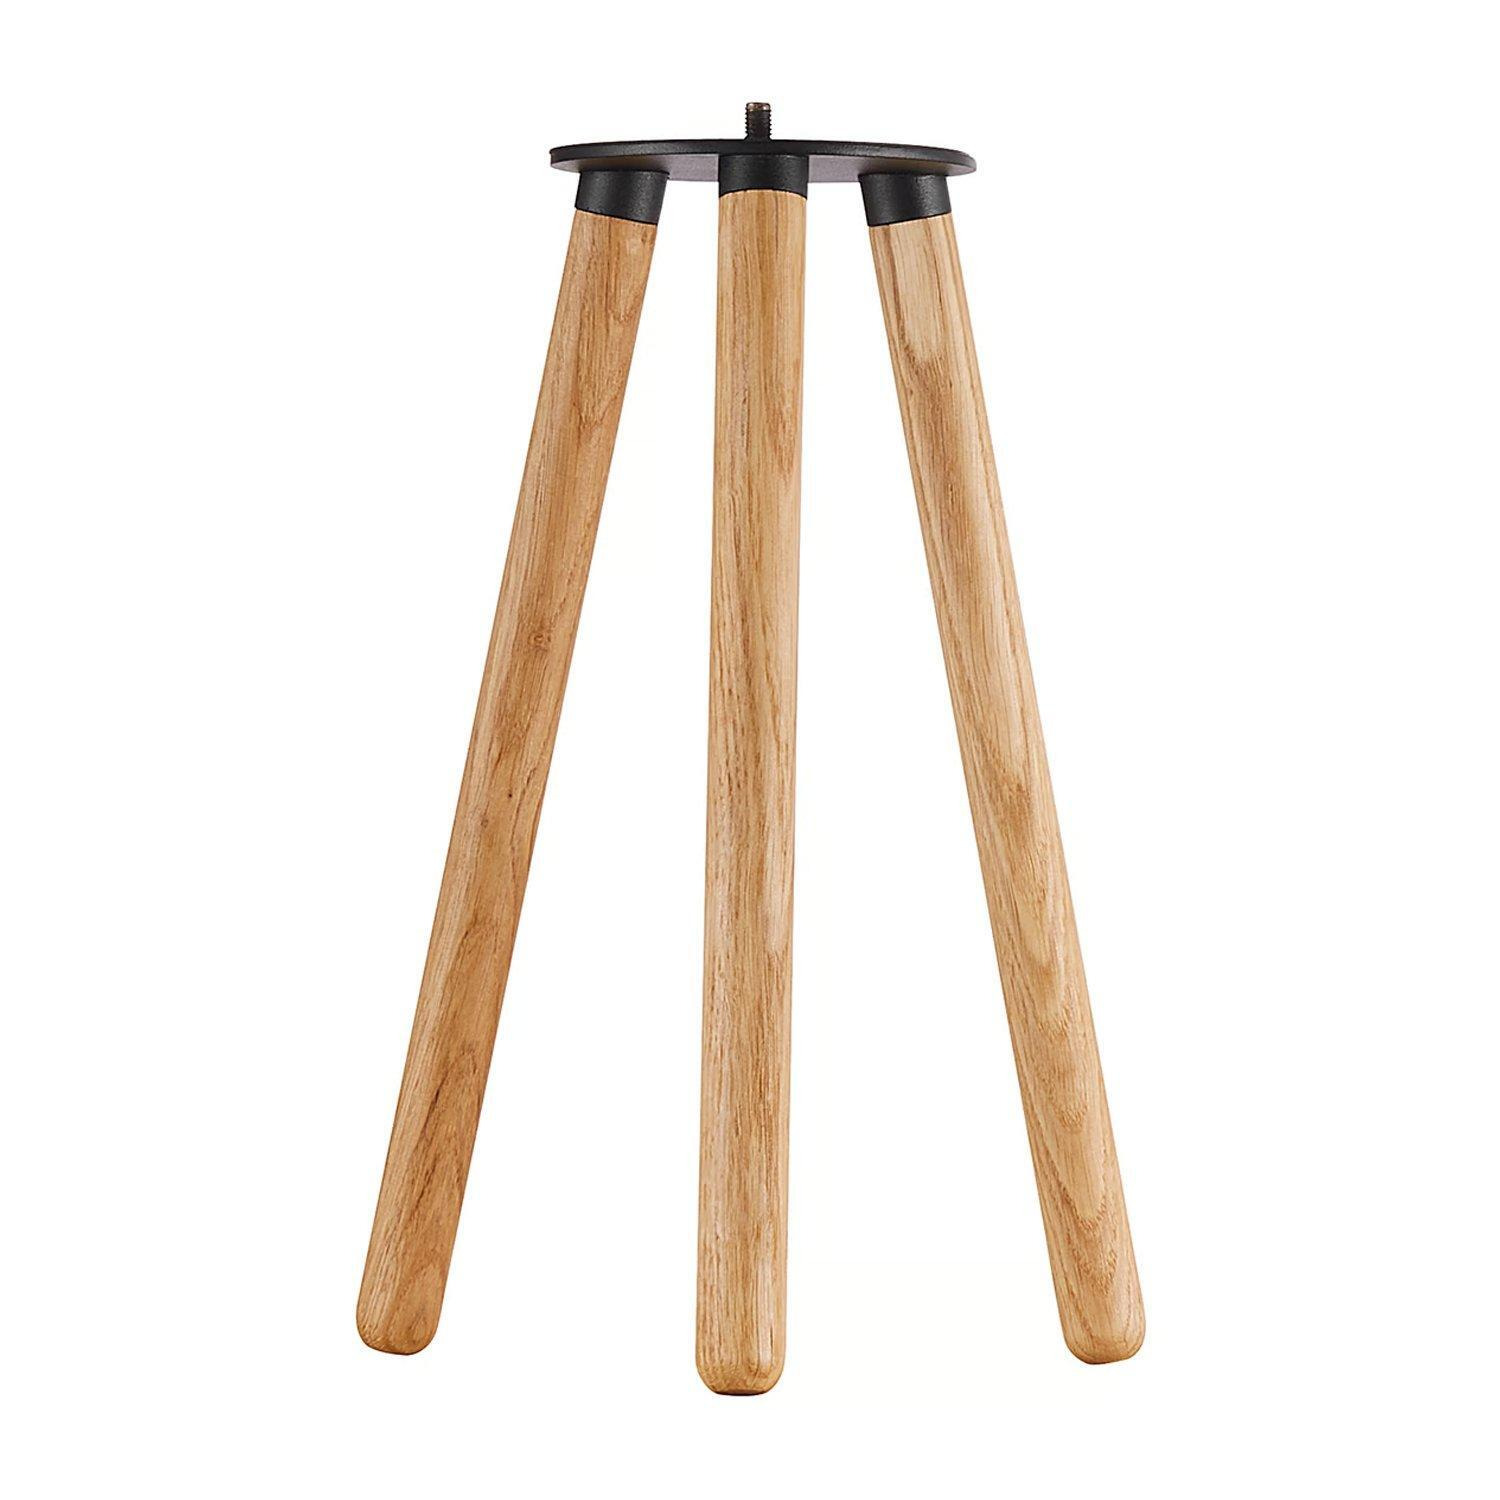 Kettle To-Go Tripod 31 Outdoor Patio Terrace Easy Twist Mount Accessory in Nature (H) 33.8cm - image 1